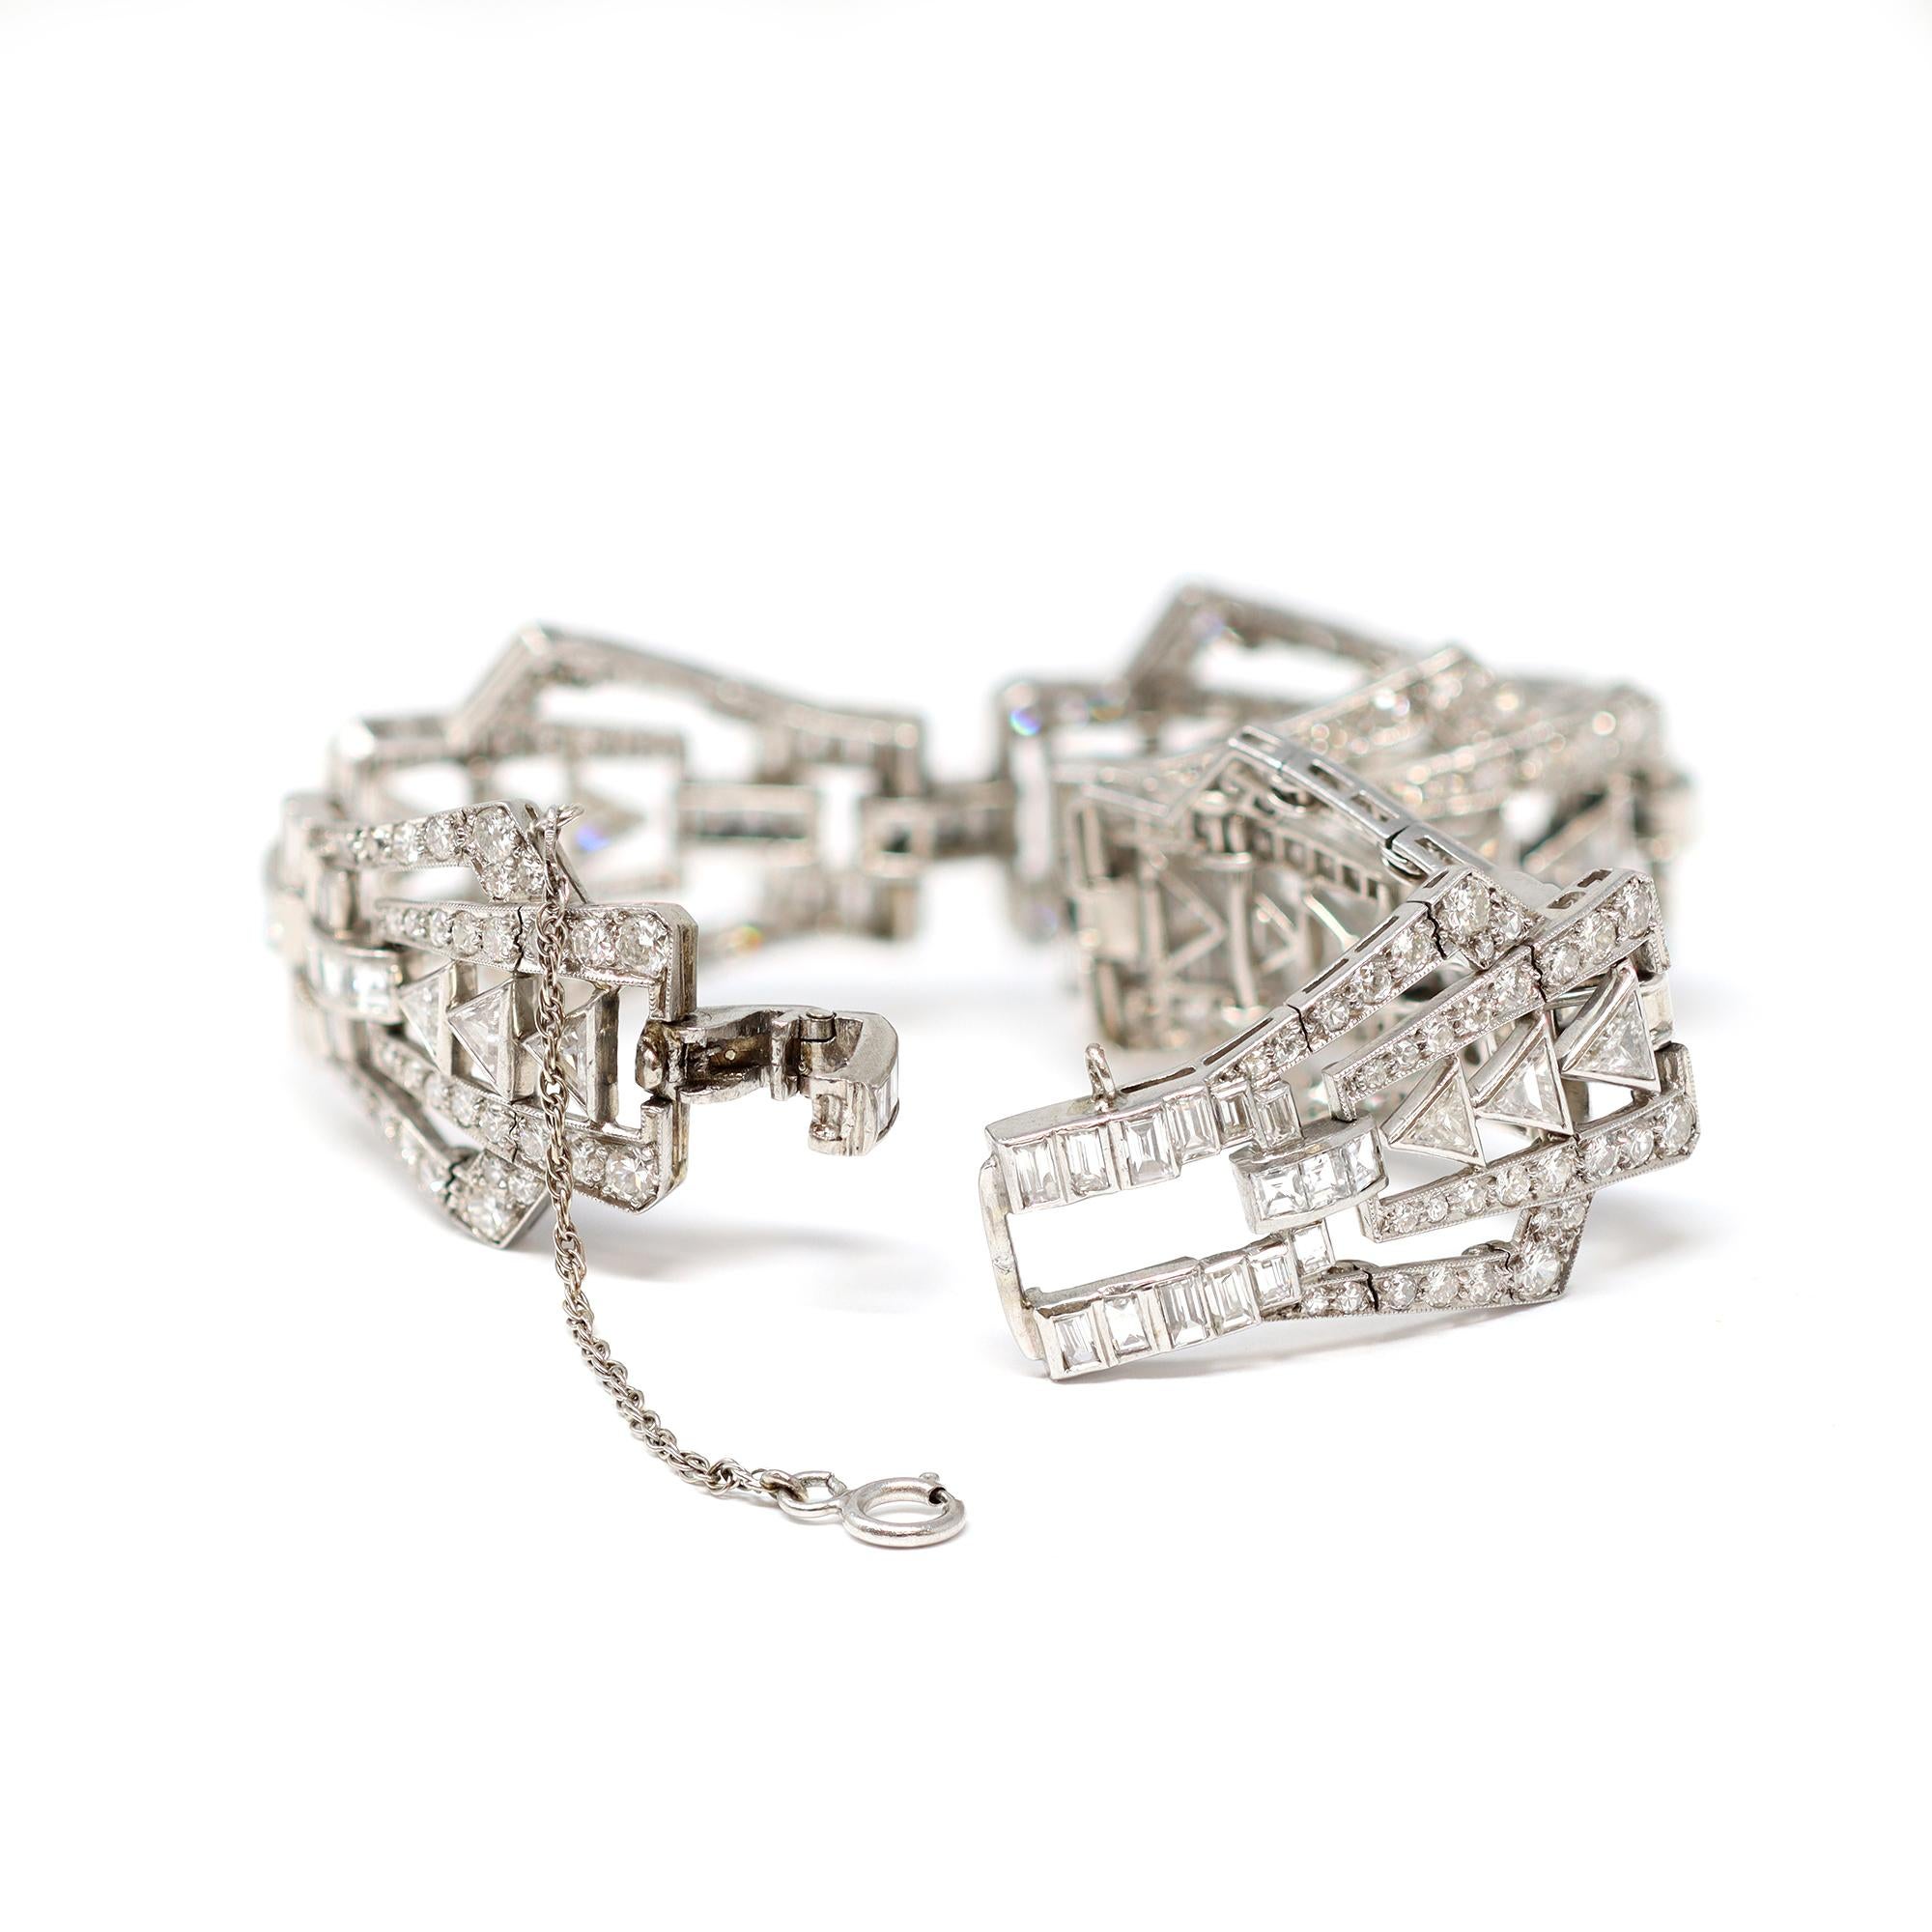 Art Deco platinum and diamond bracelet, designed as a series of openwork geometric links set throughout with various-cut diamonds weighing approximately 9.00 carats, GH color VS clarity. The gross weight is 37.2 grams, length 7 ⅛ inches, width ¾